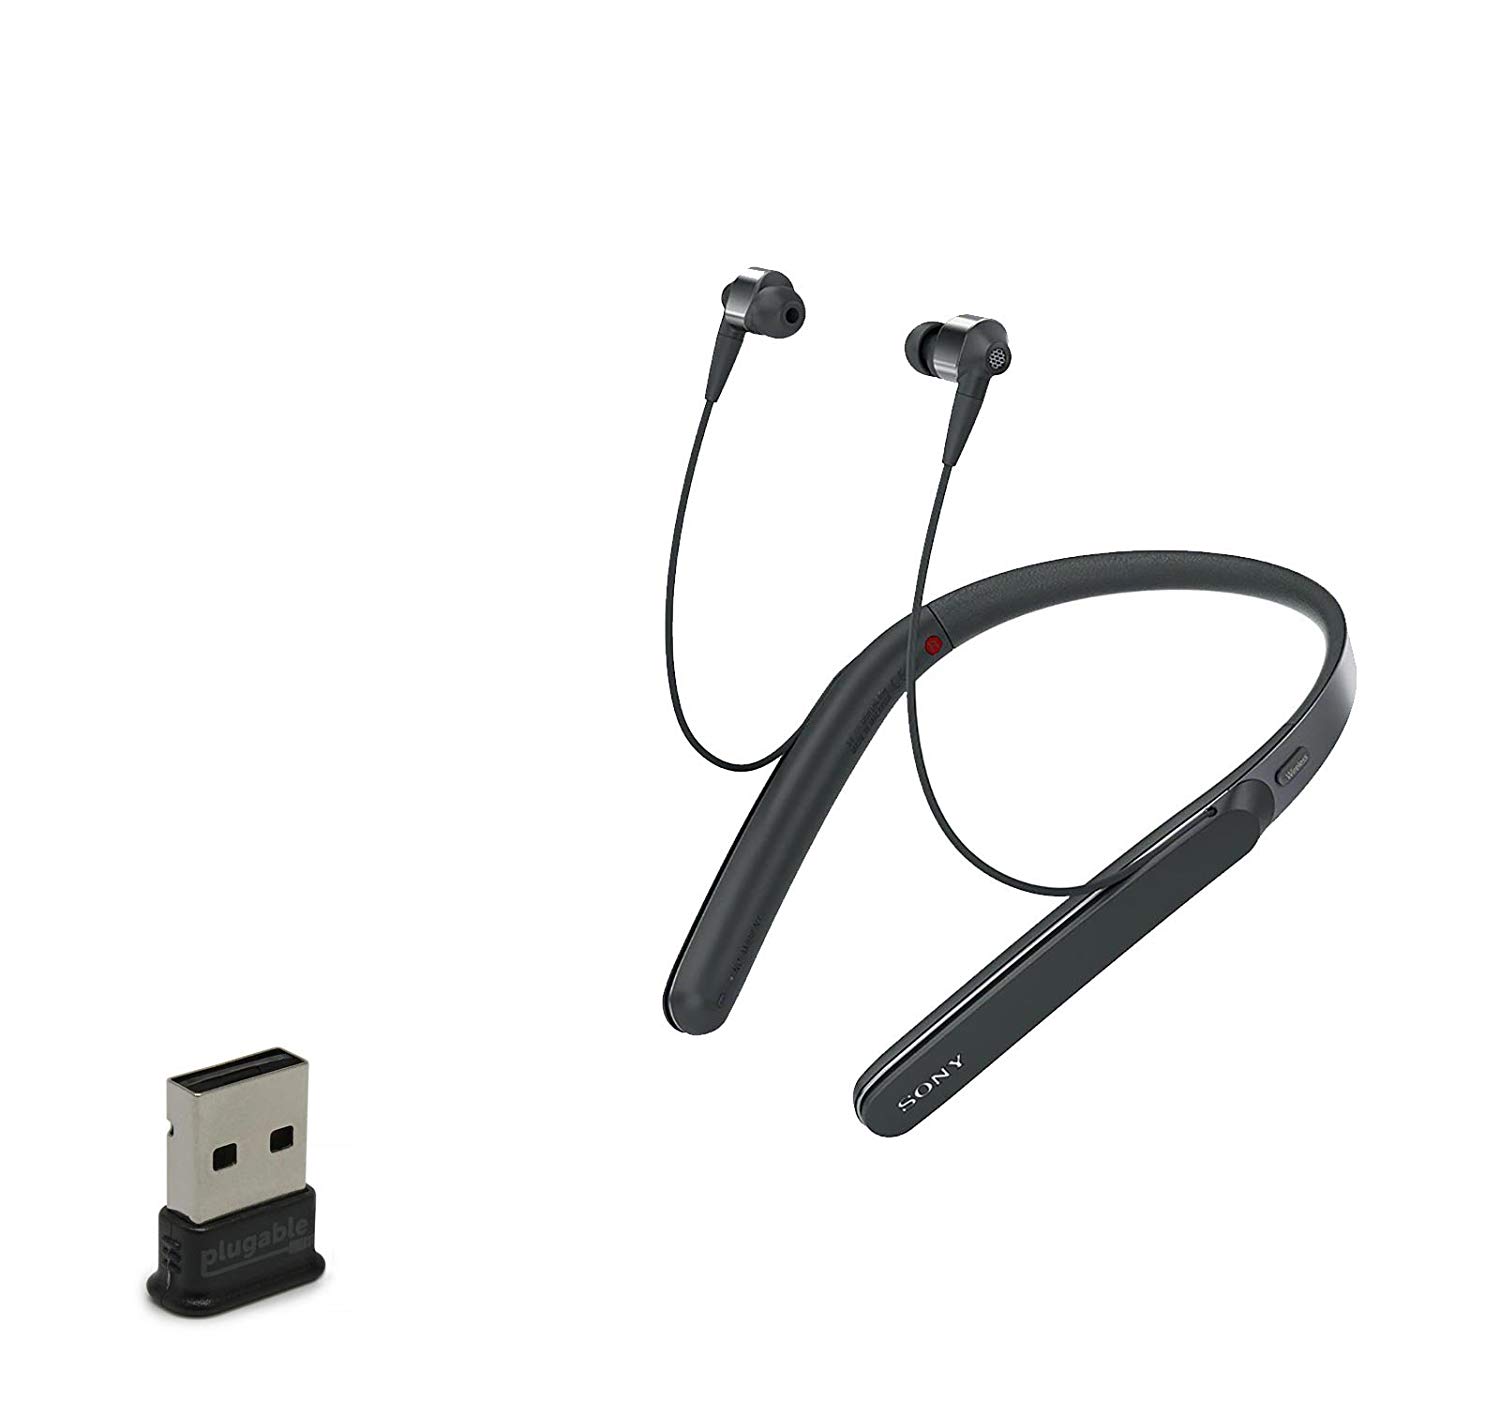 Sony WI1000X/B Wireless Bluetooth Noise Cancelling Headphone Bundle with USB Bluetooth Adapter - Black